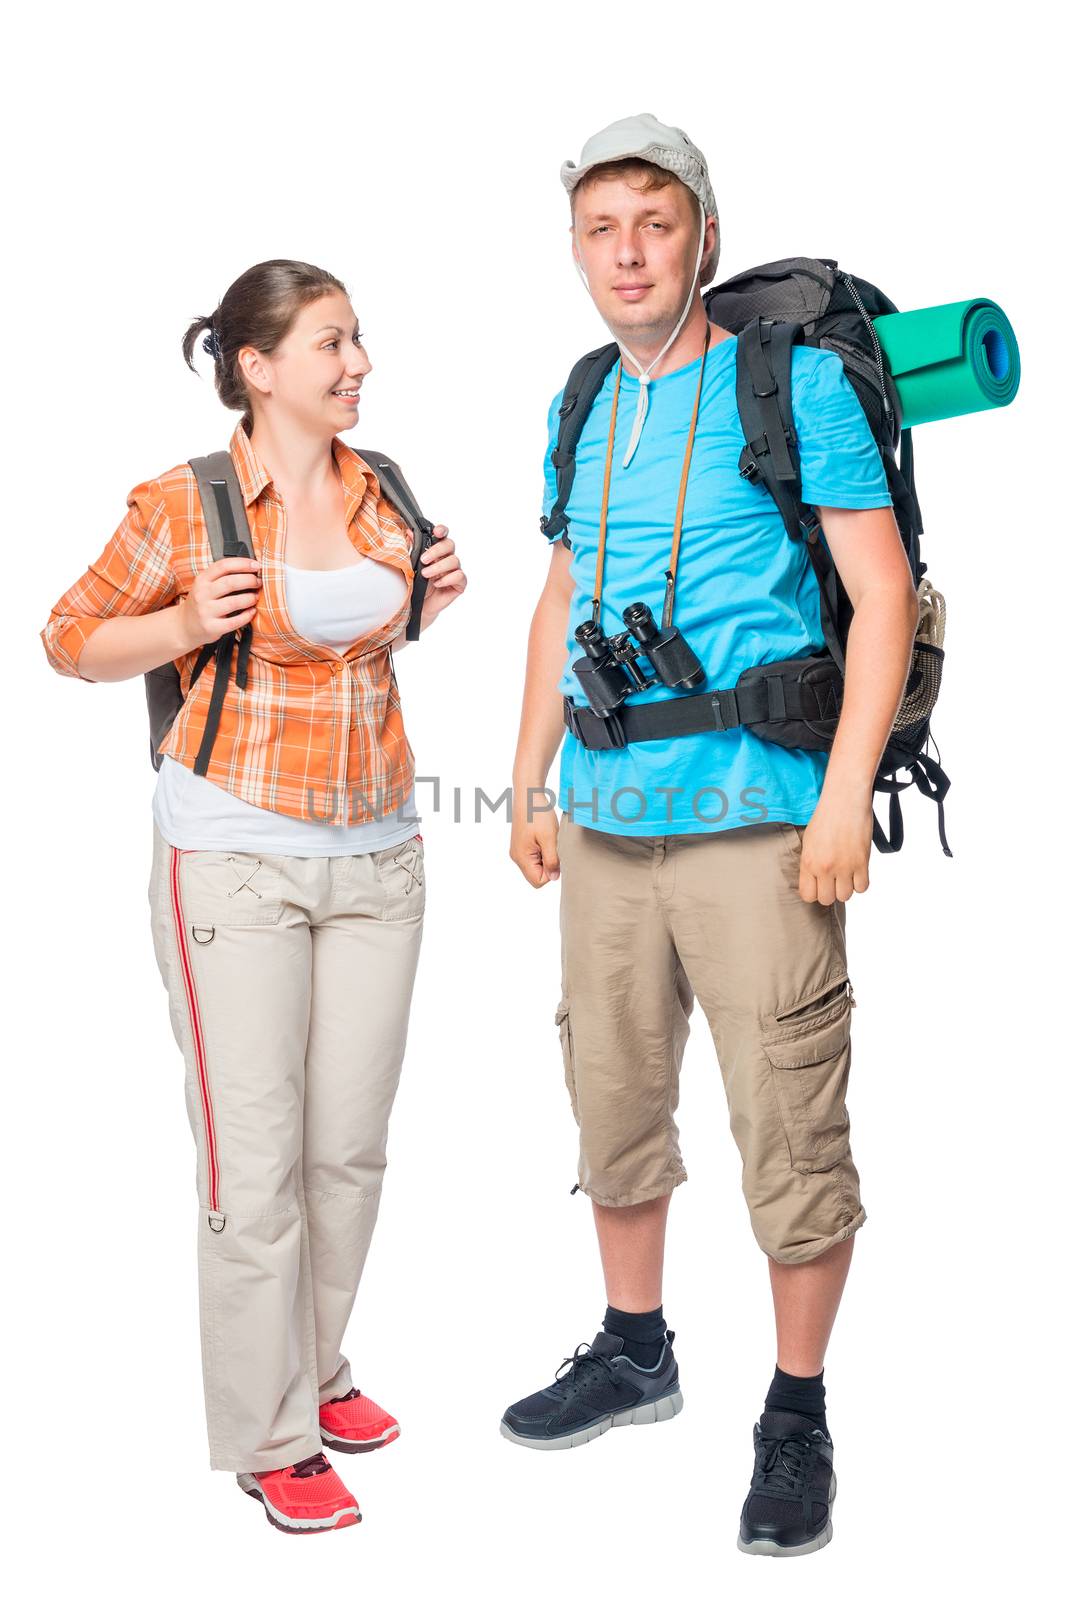 Girl and her friend with backpacks in the campaign on a white ba by kosmsos111